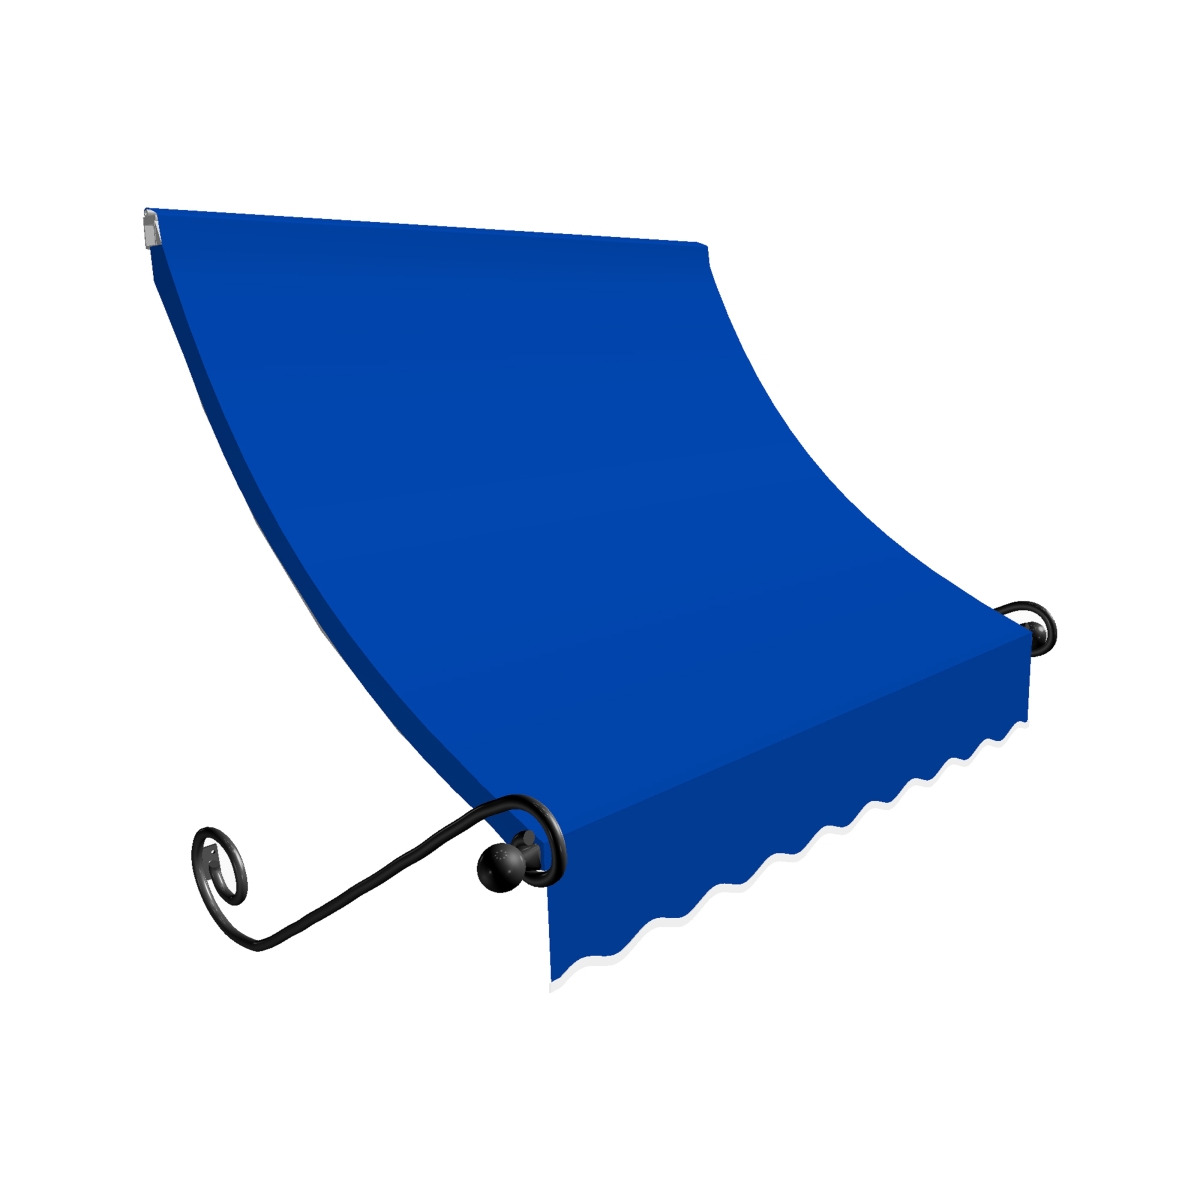 Ch22-us-5bb 5.38 Ft. Charleston Window & Entry Awning, Bright Blue - 31 X 24 In.